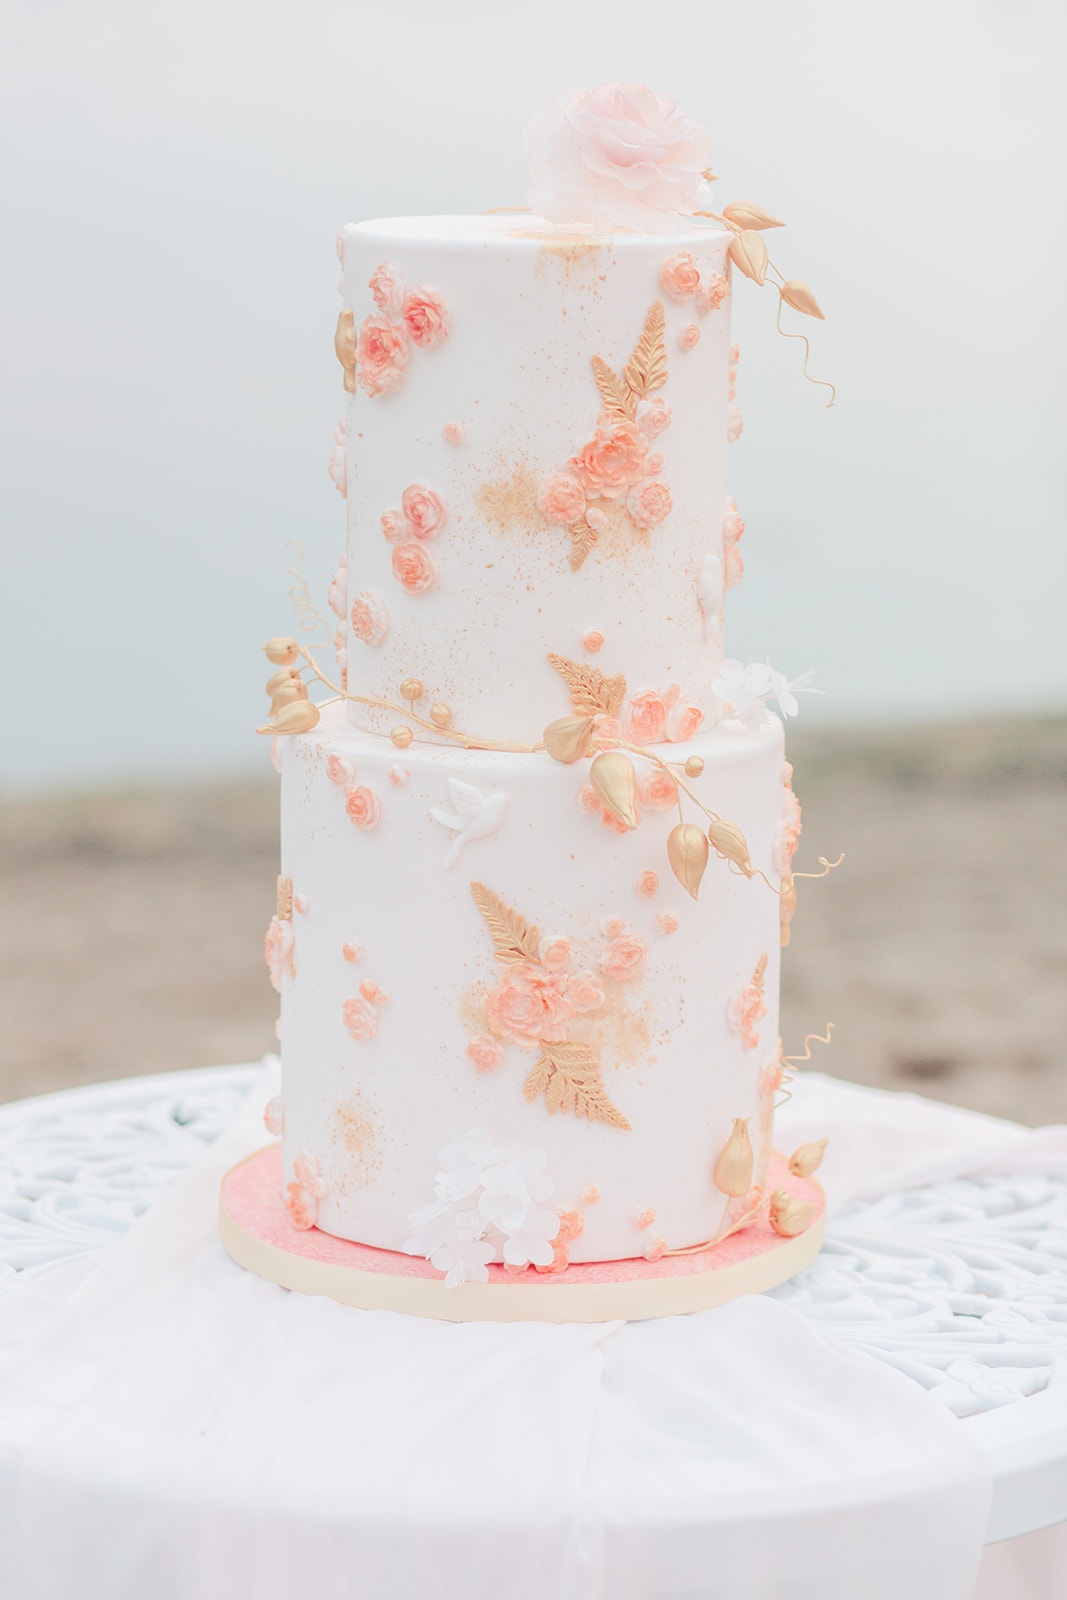 Stunning two tiered white wedding cake with gold and pink floral details